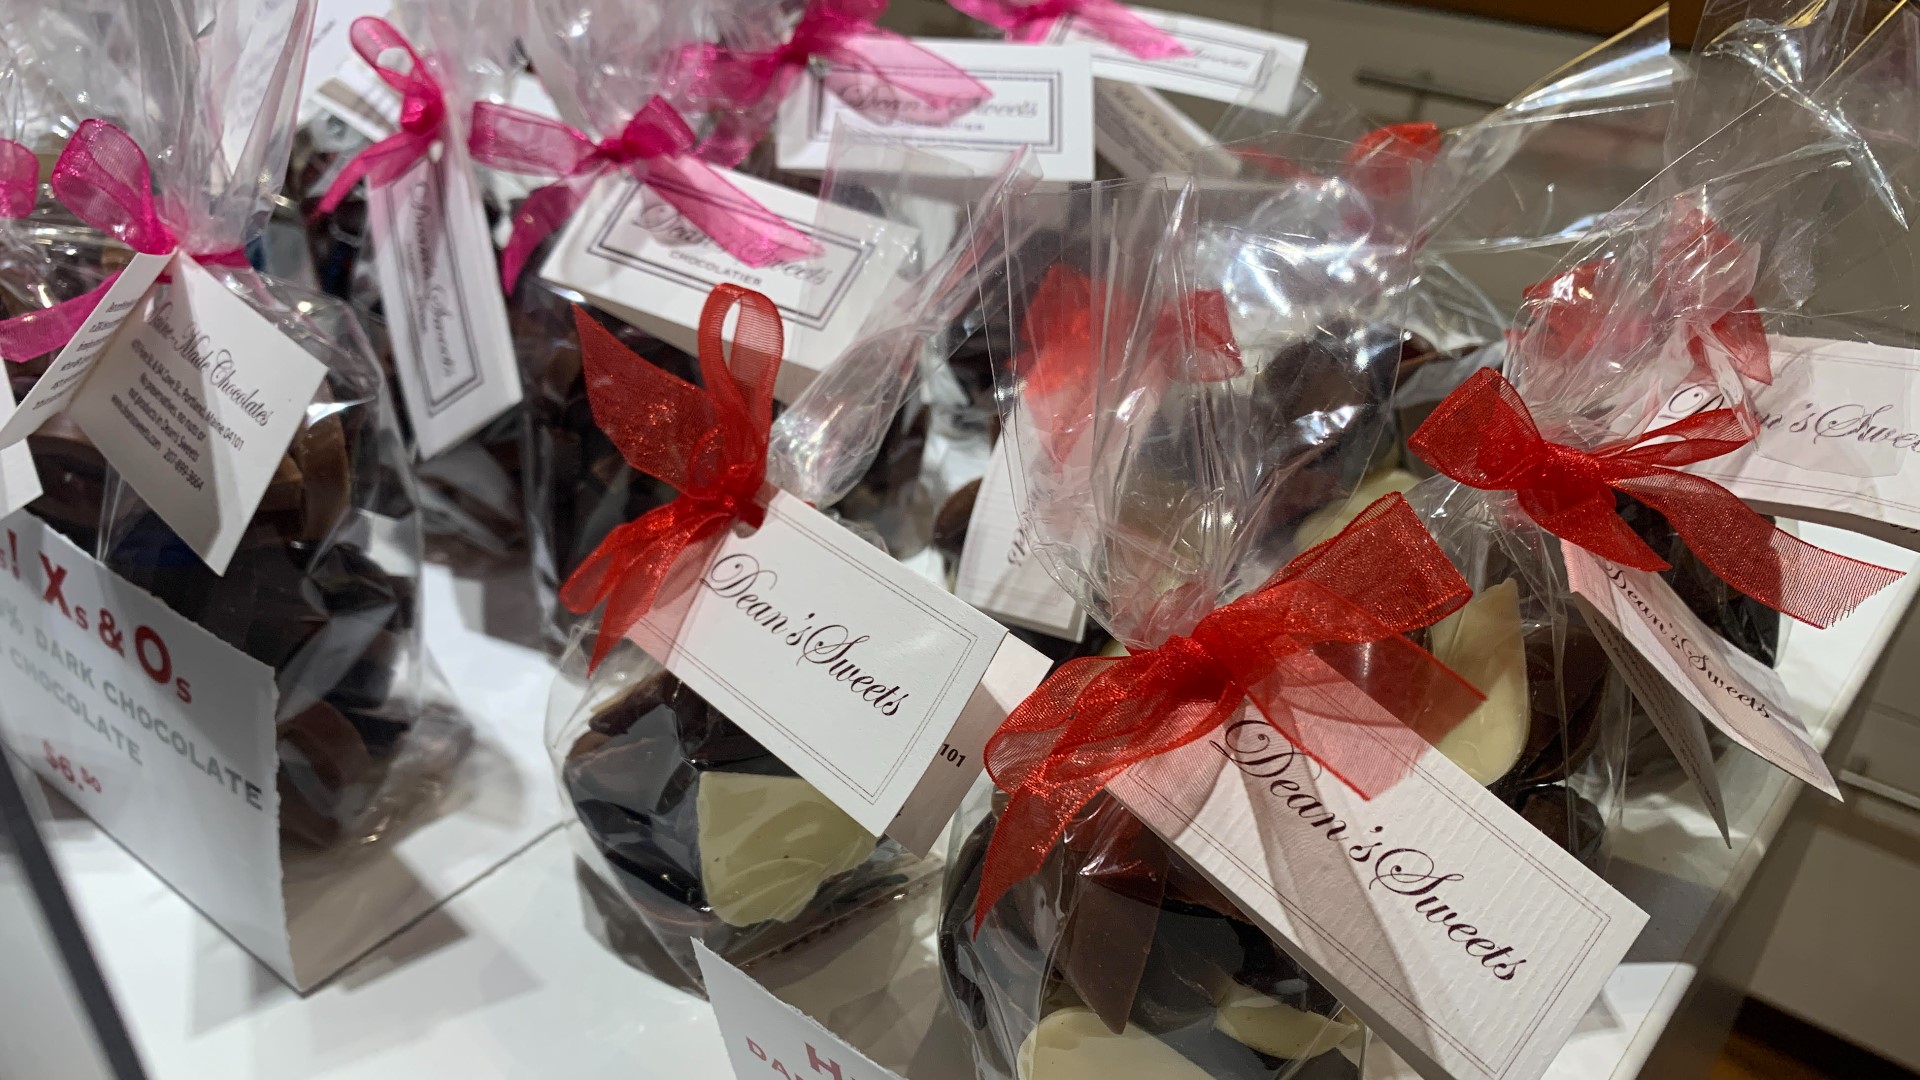 Chocolatier Dean Bingham said making chocolate truffles with love and passion is the key to the success behind his nearly 20-year streak of keeping the shop open.